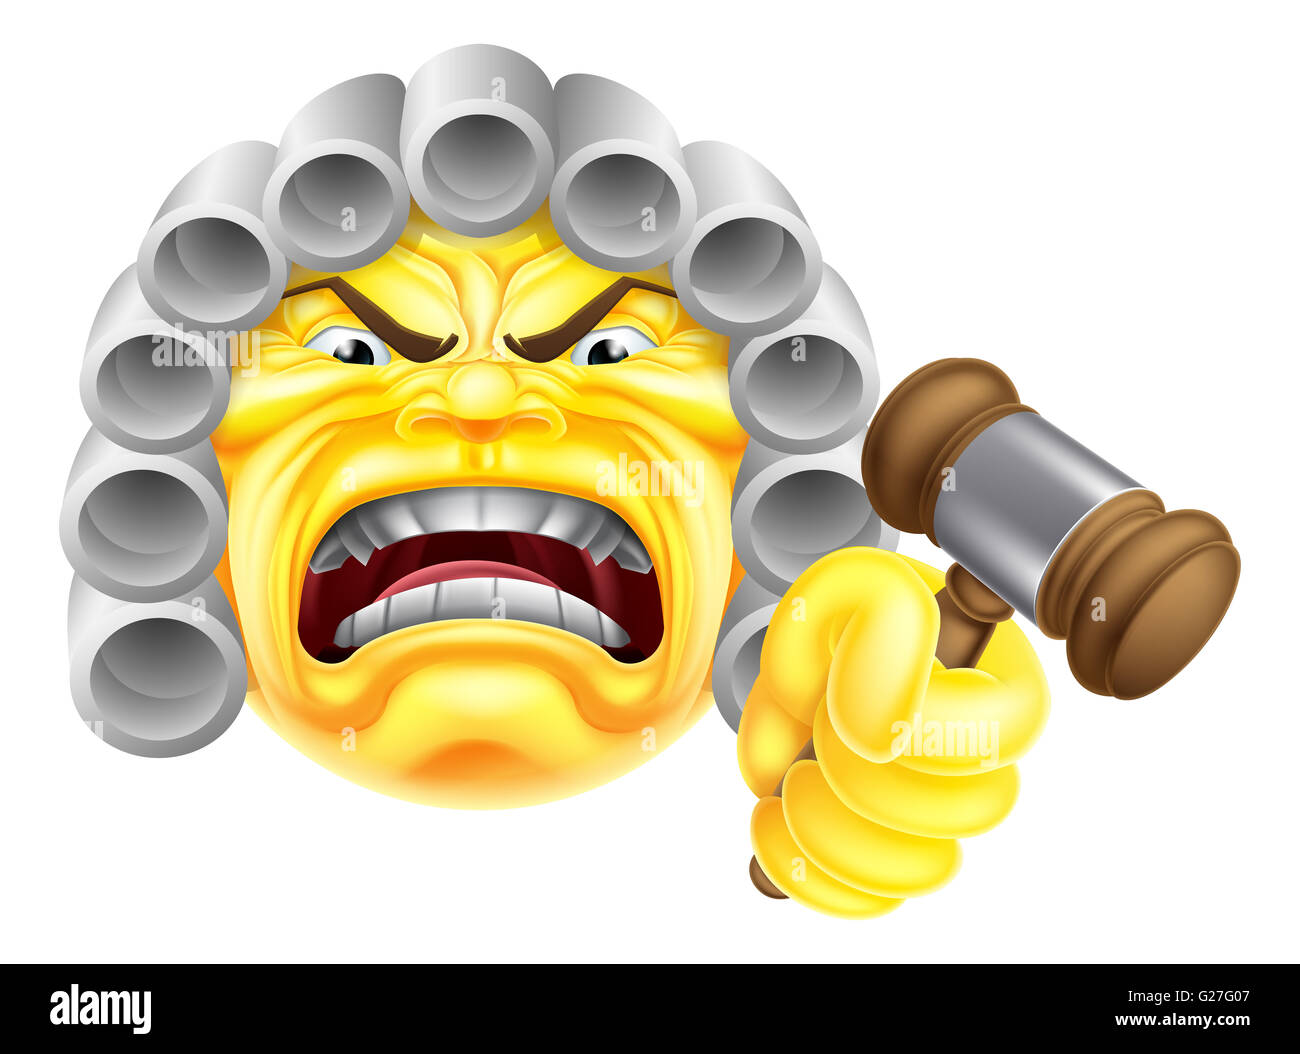 An angry judge emoji emoticon icon character illustration Stock Photo